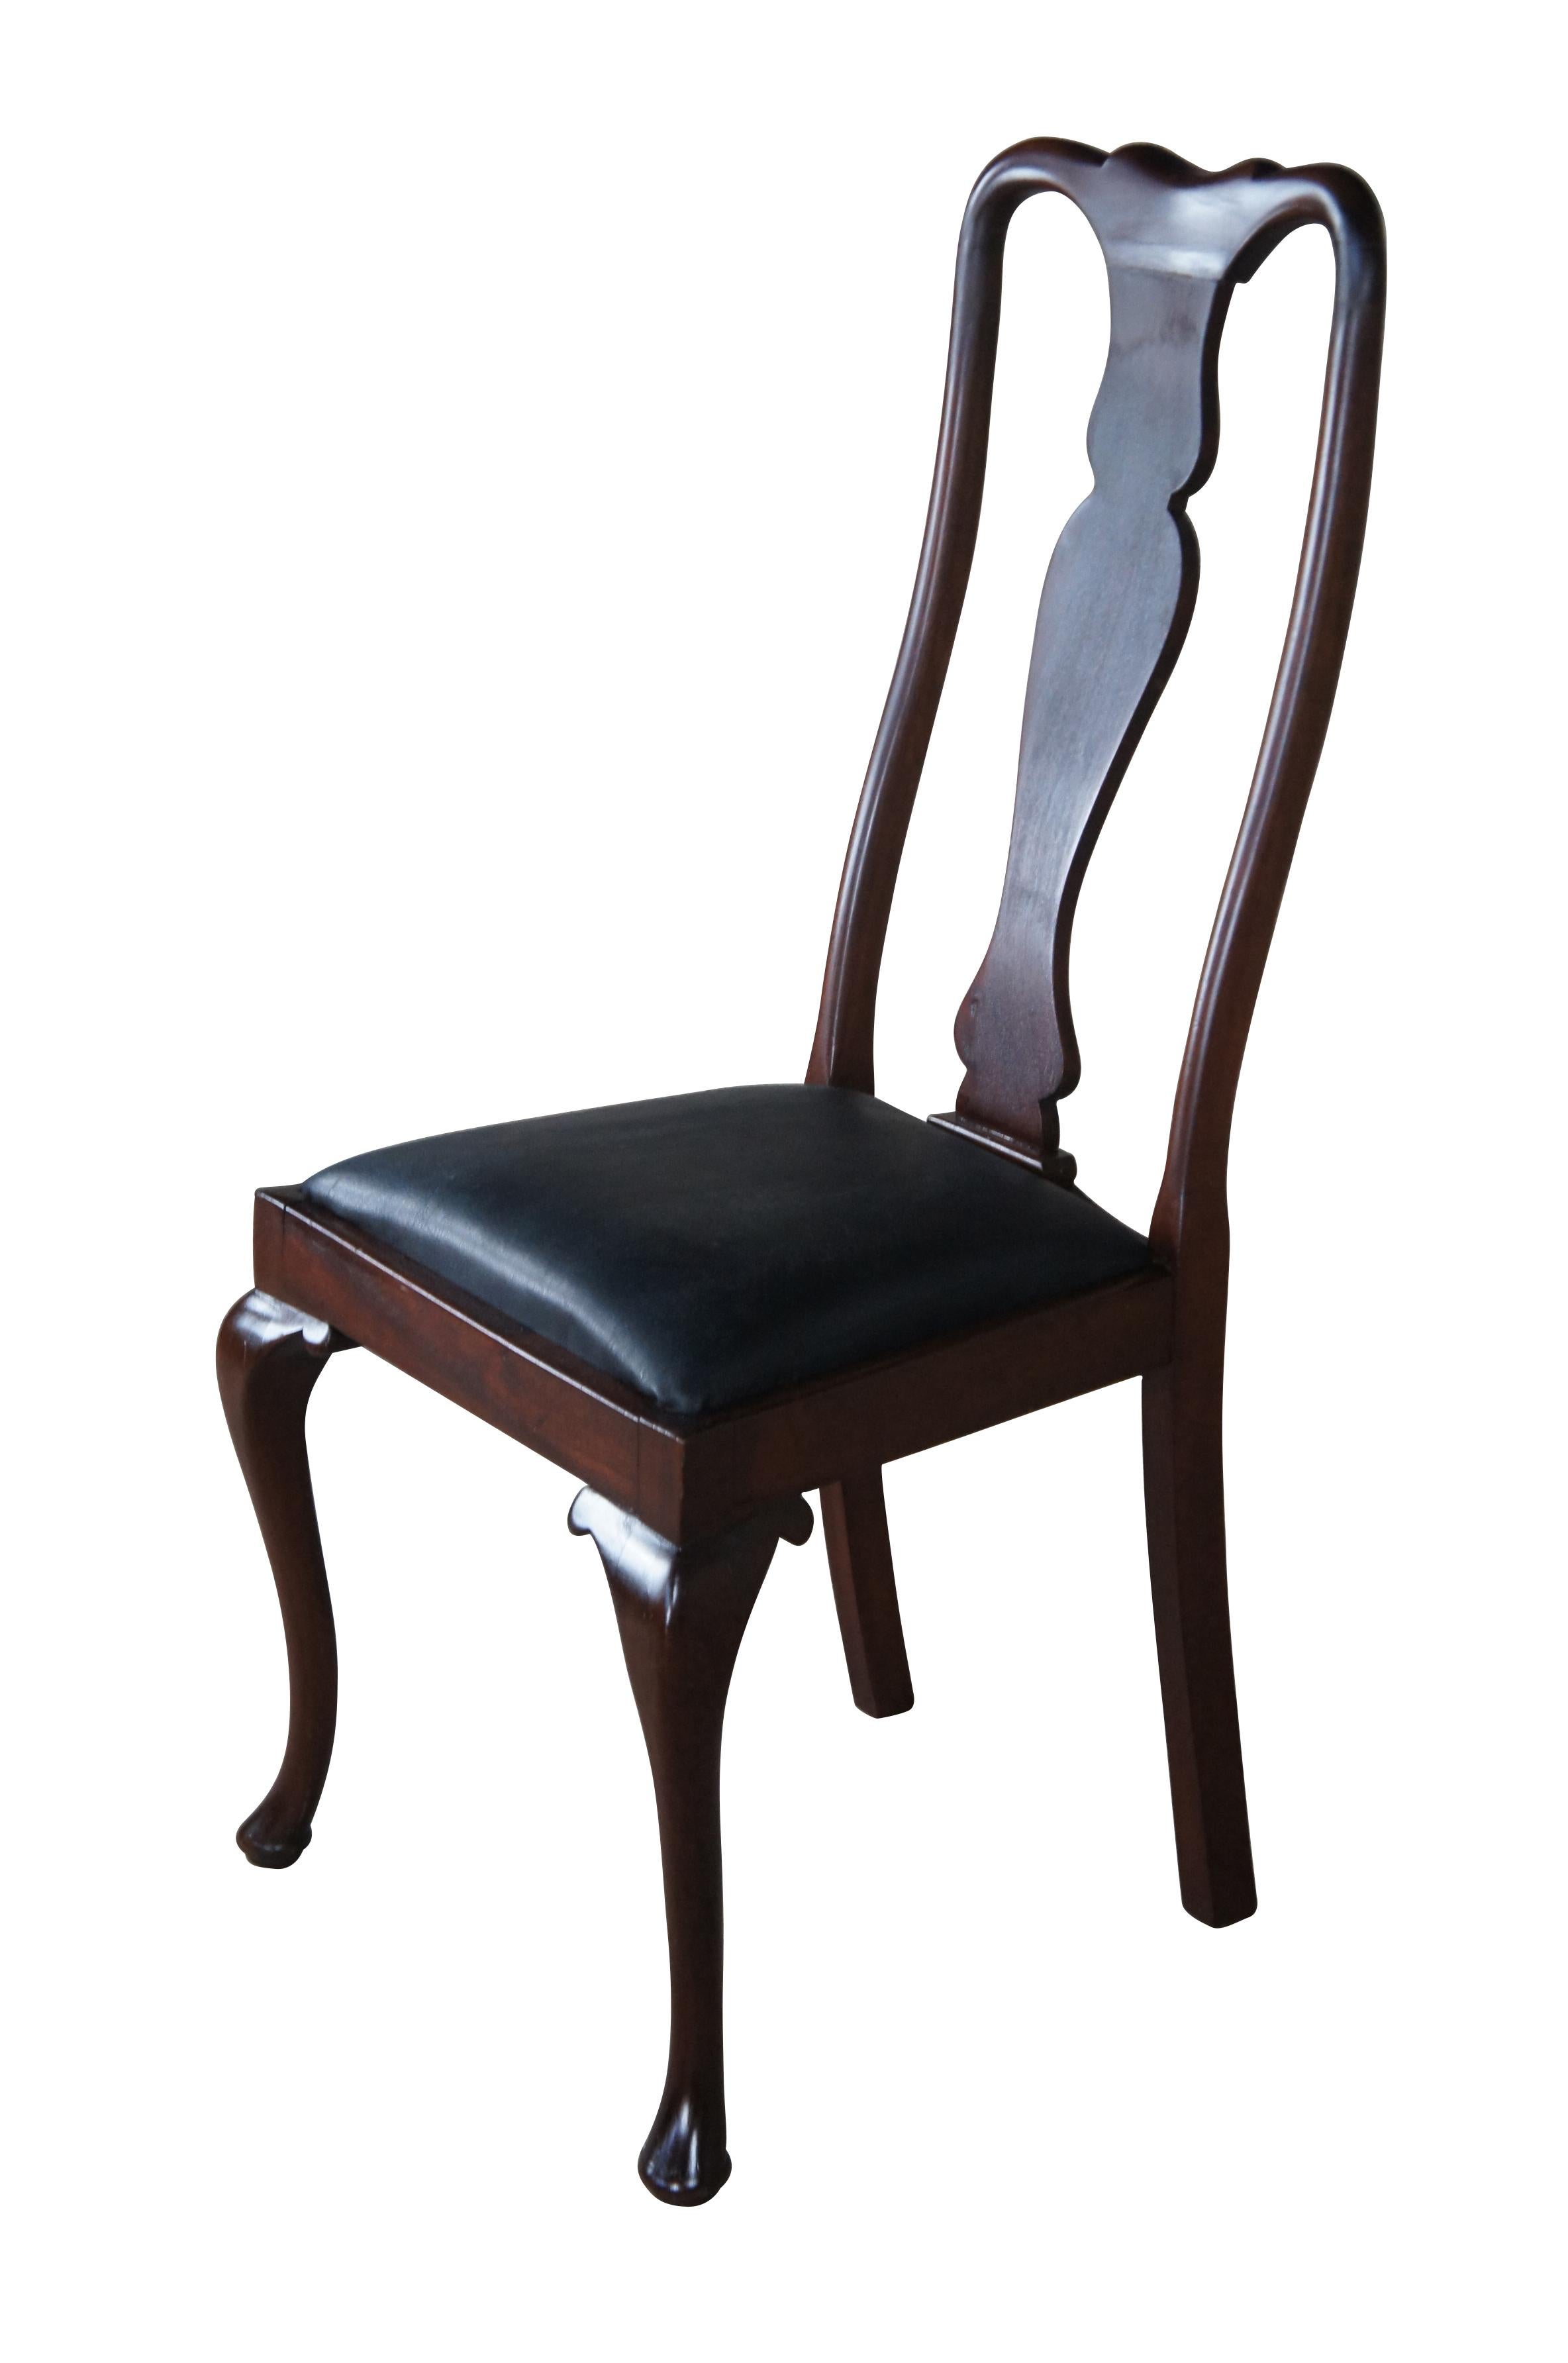 Antique Queen Anne side chair.  Made of mahogany featuring high vase shaped splat back with curved crest and black leather deer hide seat.

Dimensions:
24